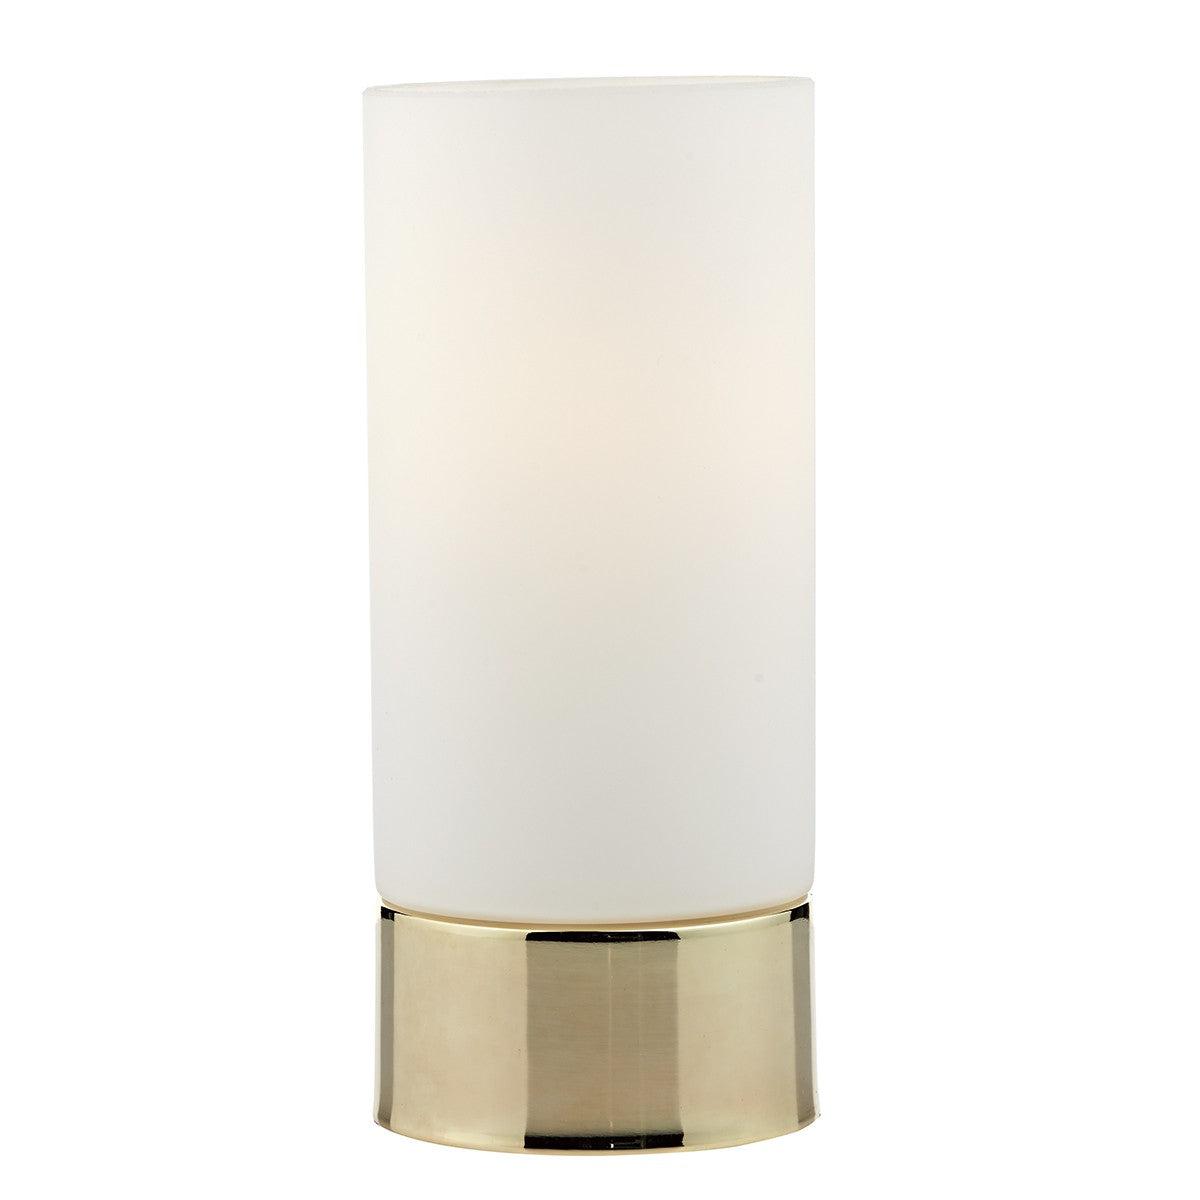 Gold Touch Lamp - The Nancy Smillie Shop - Art, Jewellery & Designer Gifts Glasgow